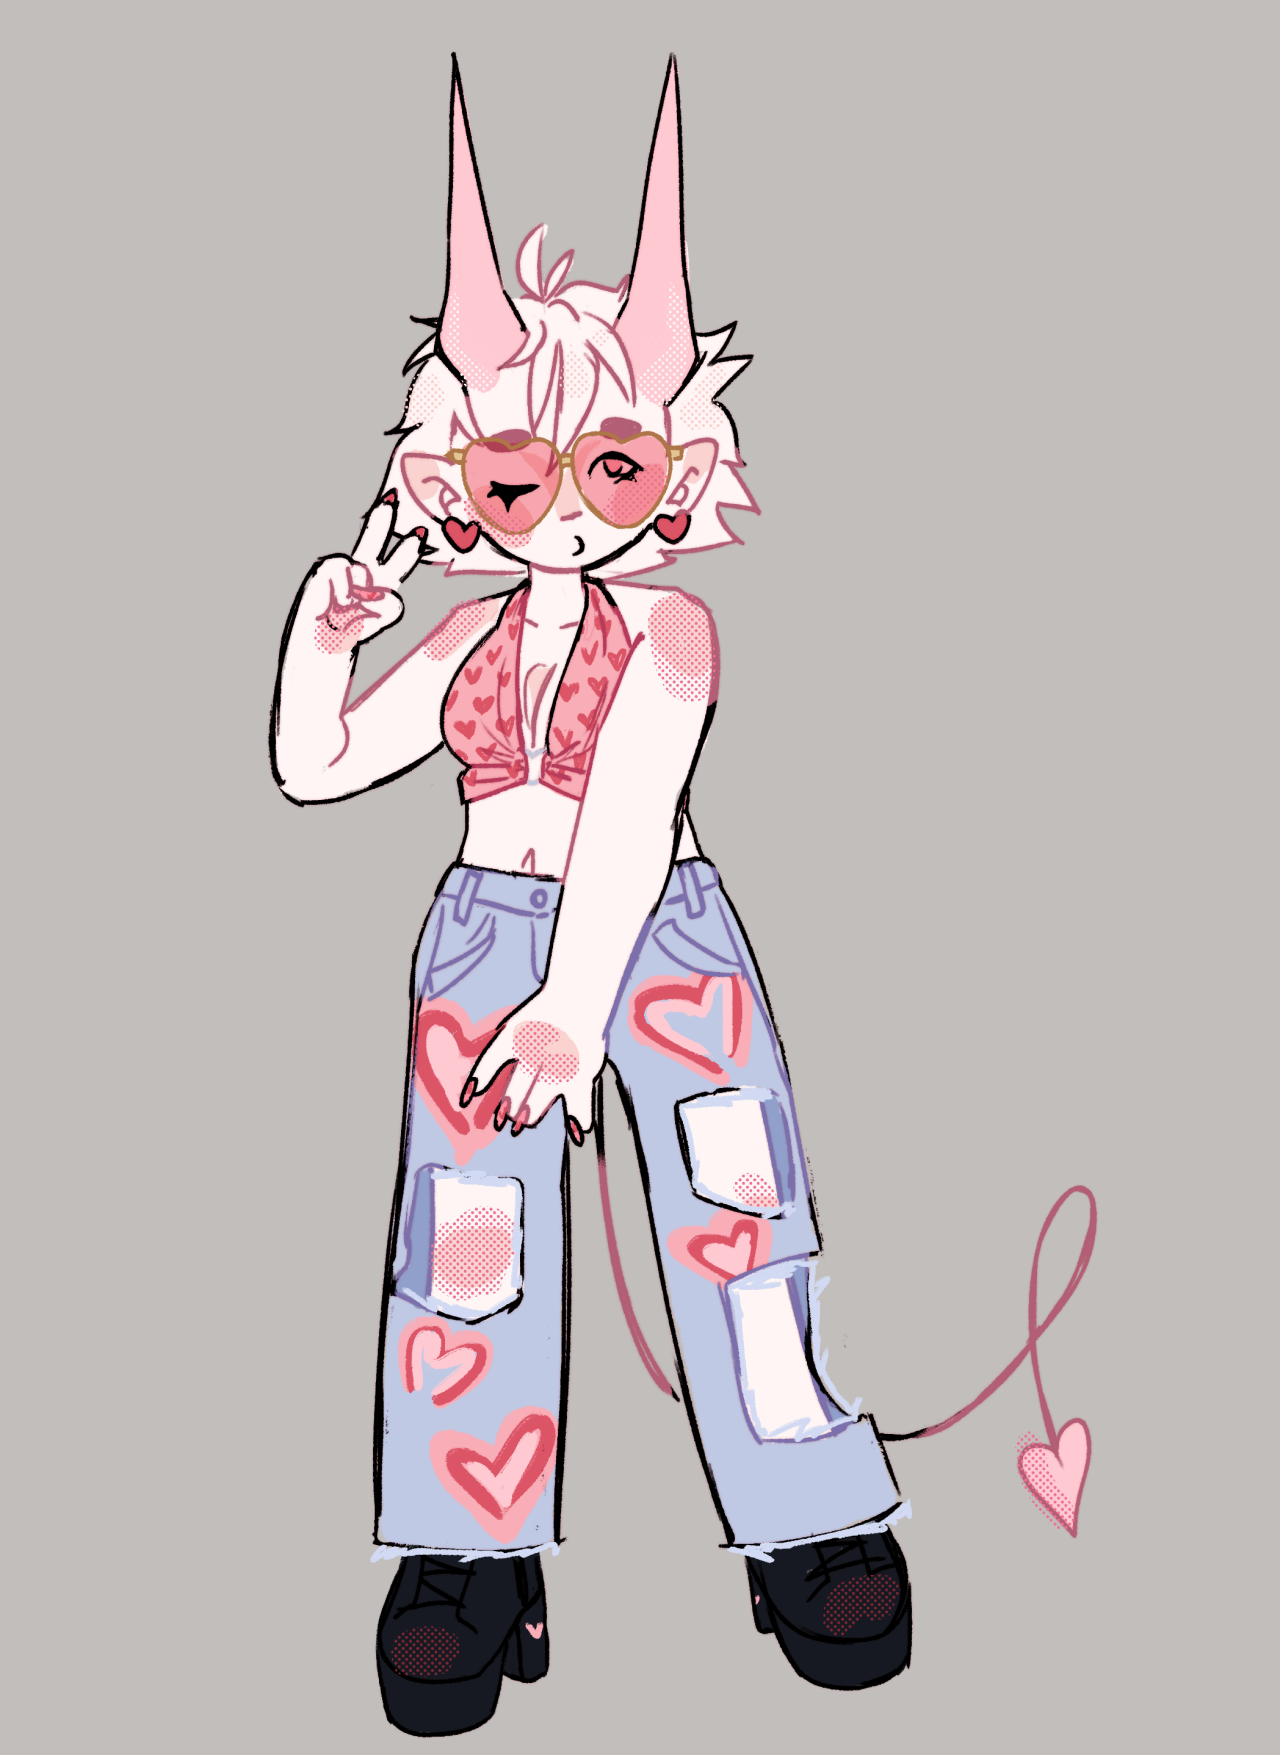 September 4, 2022. my oc tulip, rocking an outfit from a twitter prompt